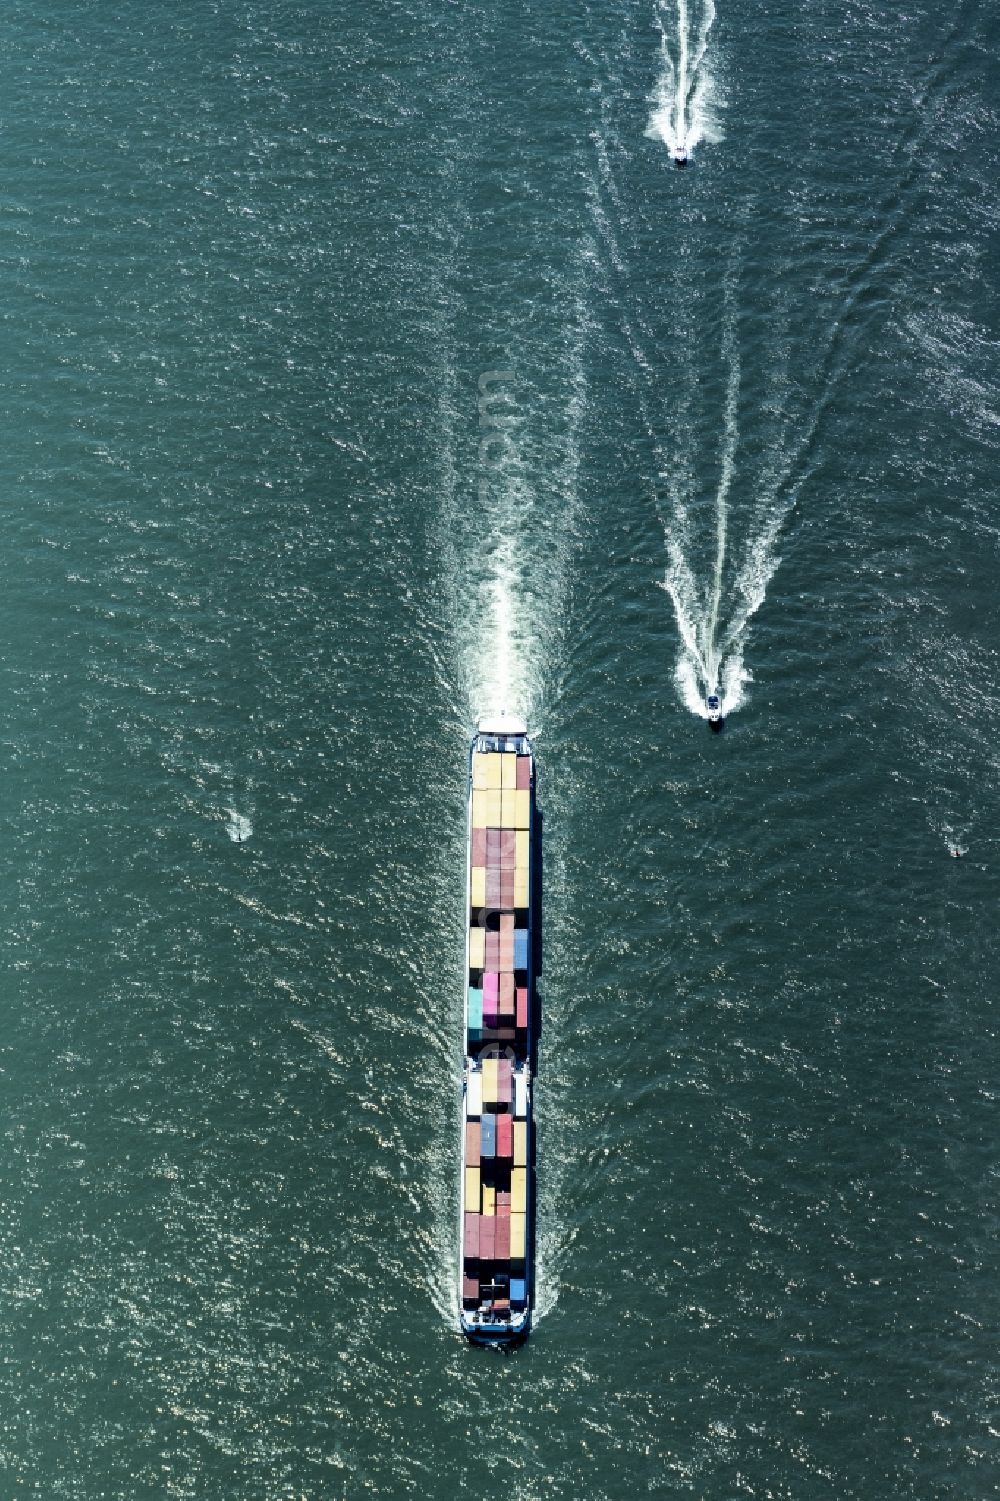 Aerial photograph Oestrich-Winkel - Sailing container ship on Rhein in Oestrich-Winkel in the state Hesse, Germany